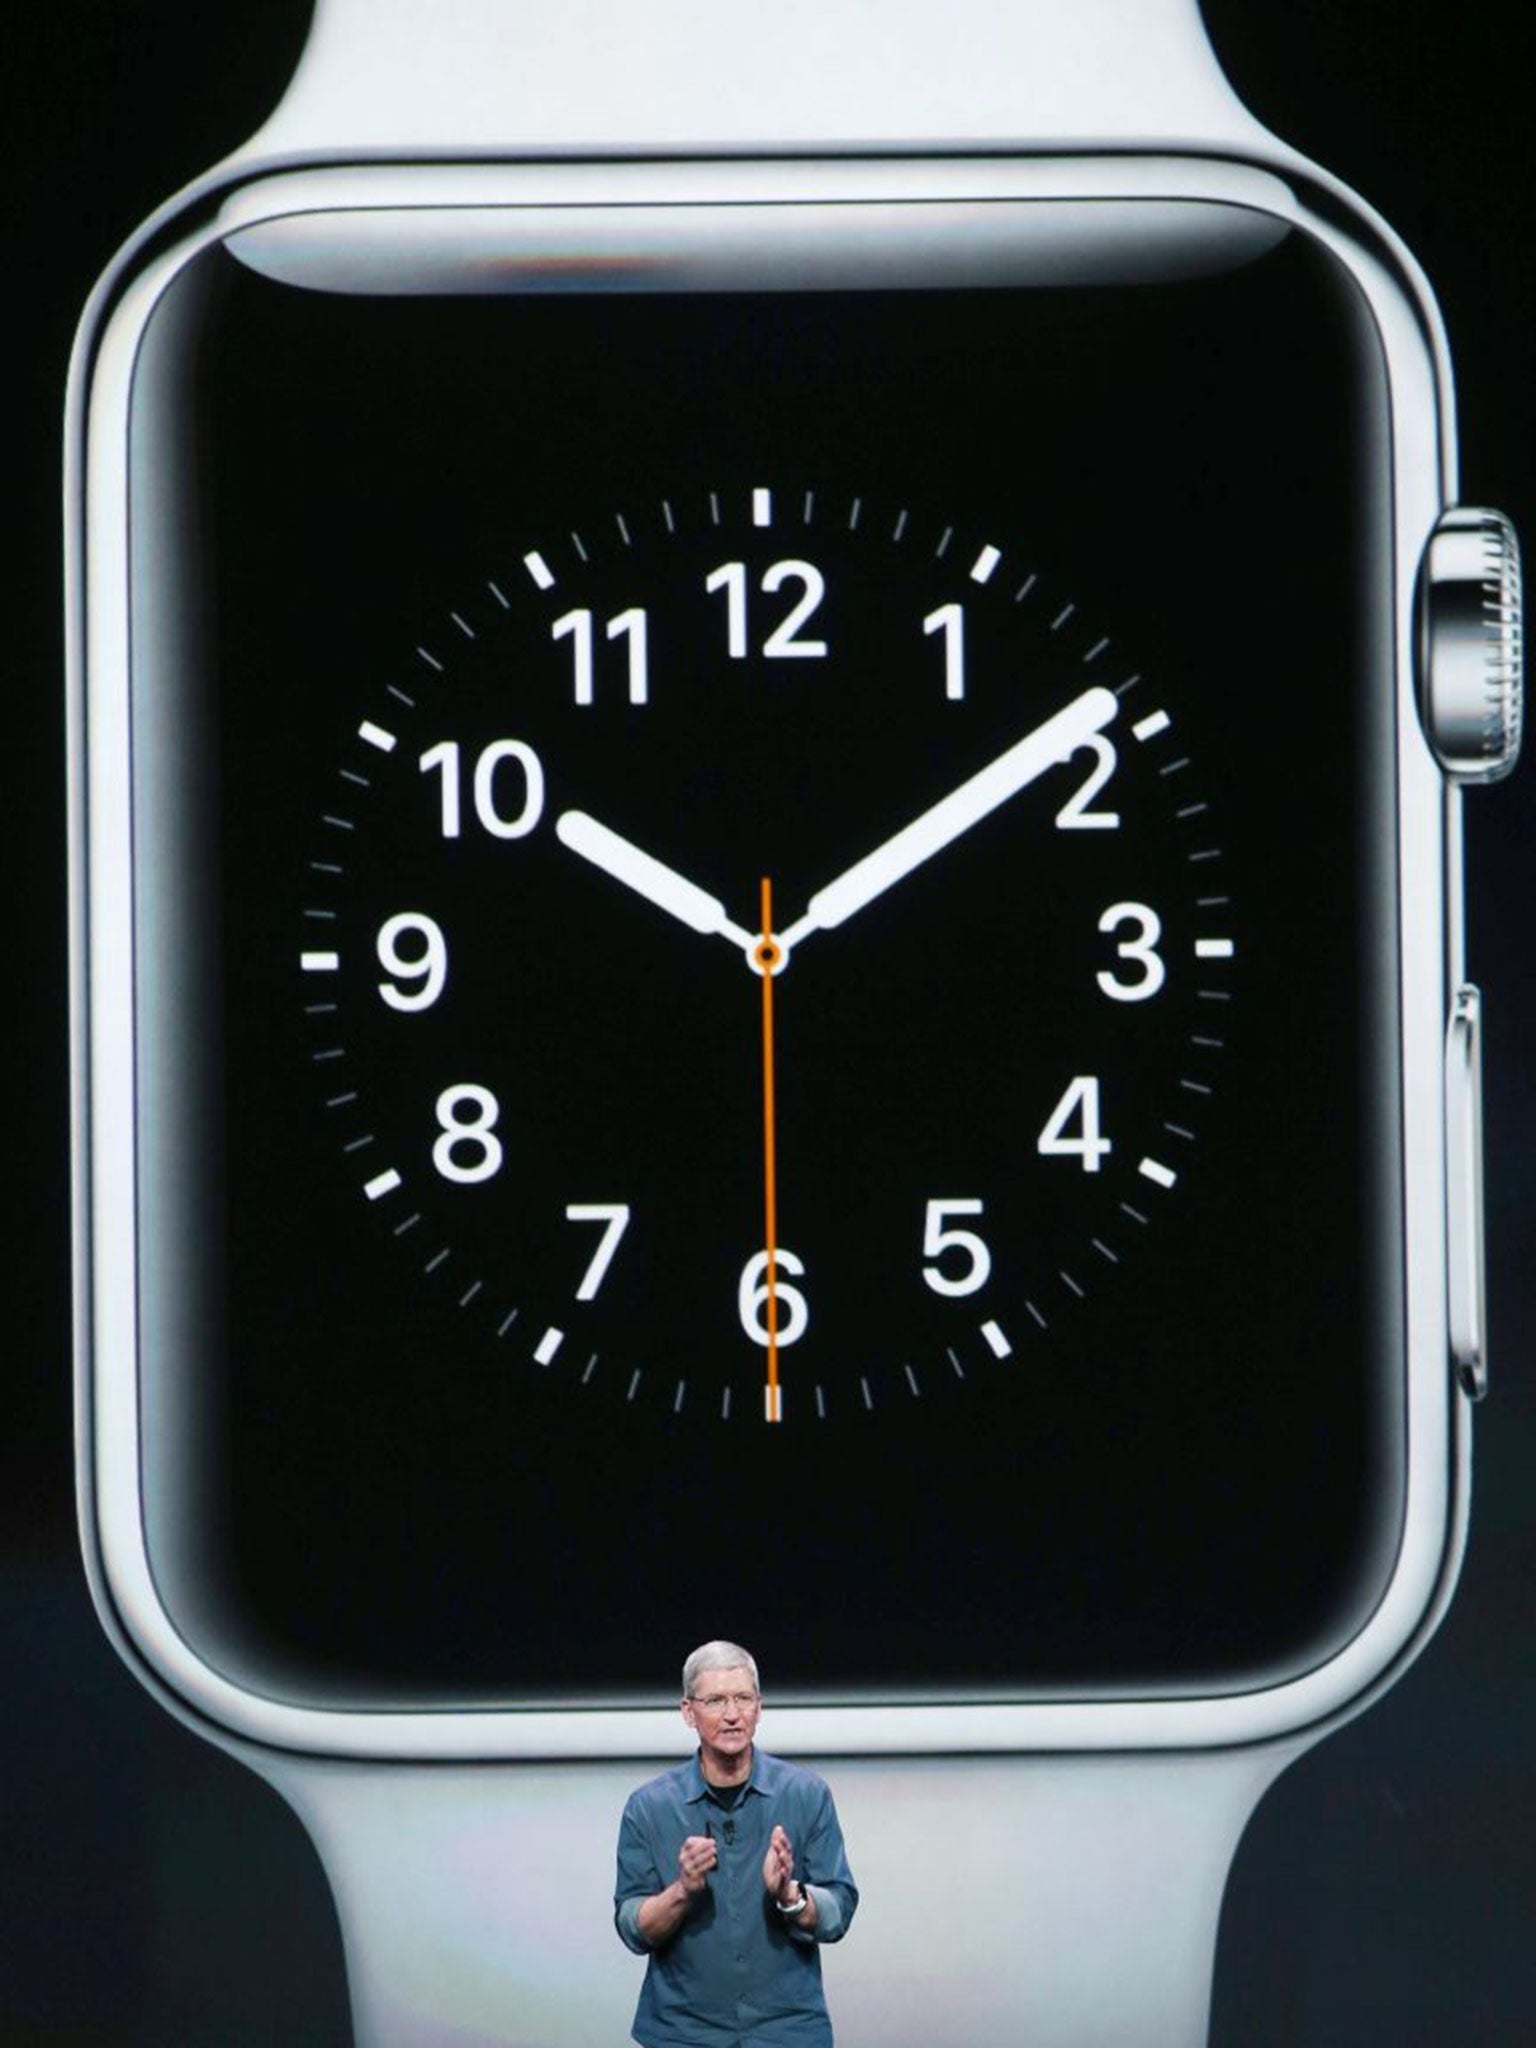 Apple Watch price: 'iWatch' price in UK and US revealed at 